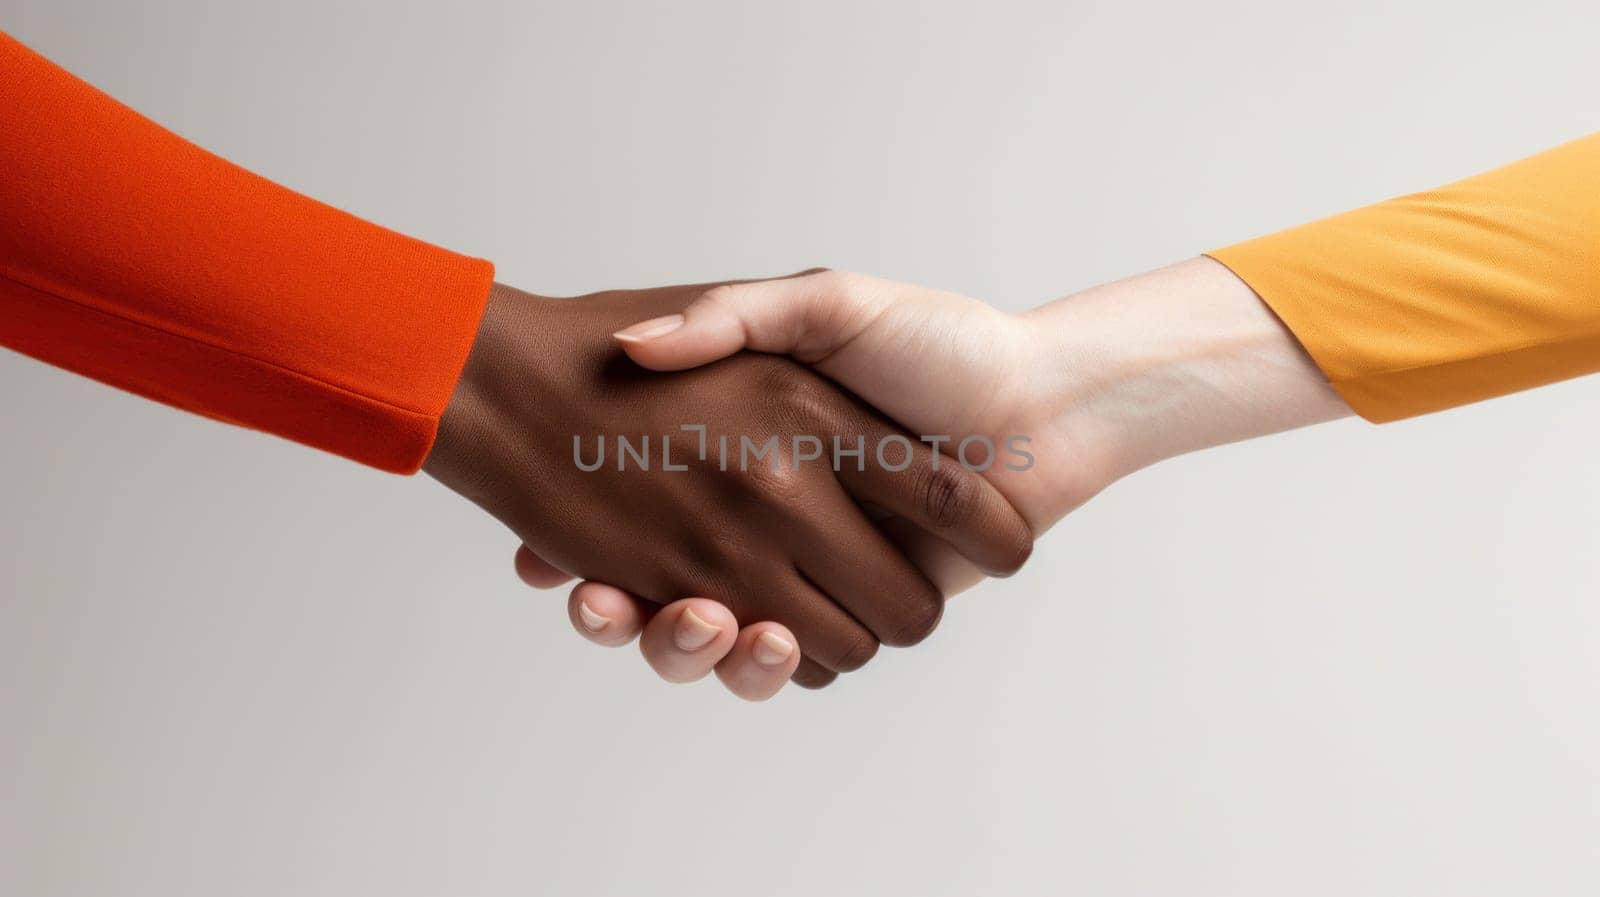 Two people shaking hands with one hand in orange and the other in red